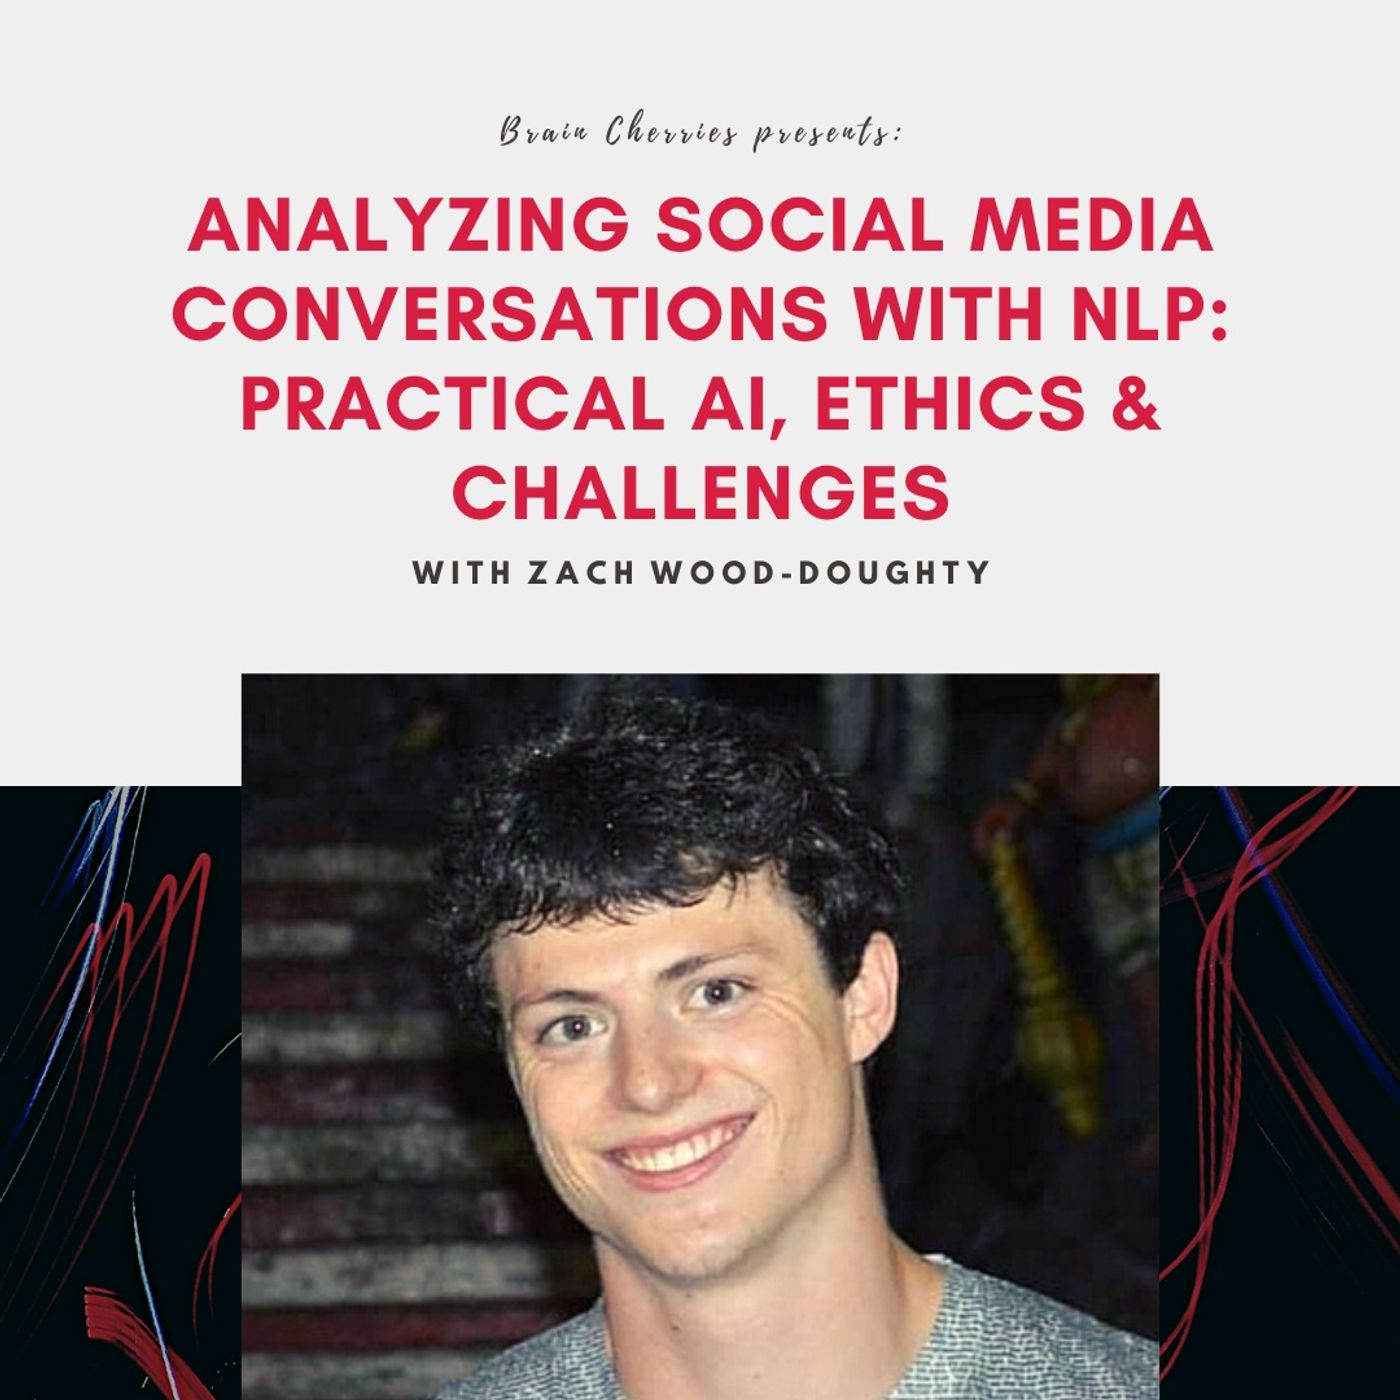 8. Analyzing Social Media Conversations with NLP: Practical AI, Ethics & Challenges with Zach Wood-Doughty